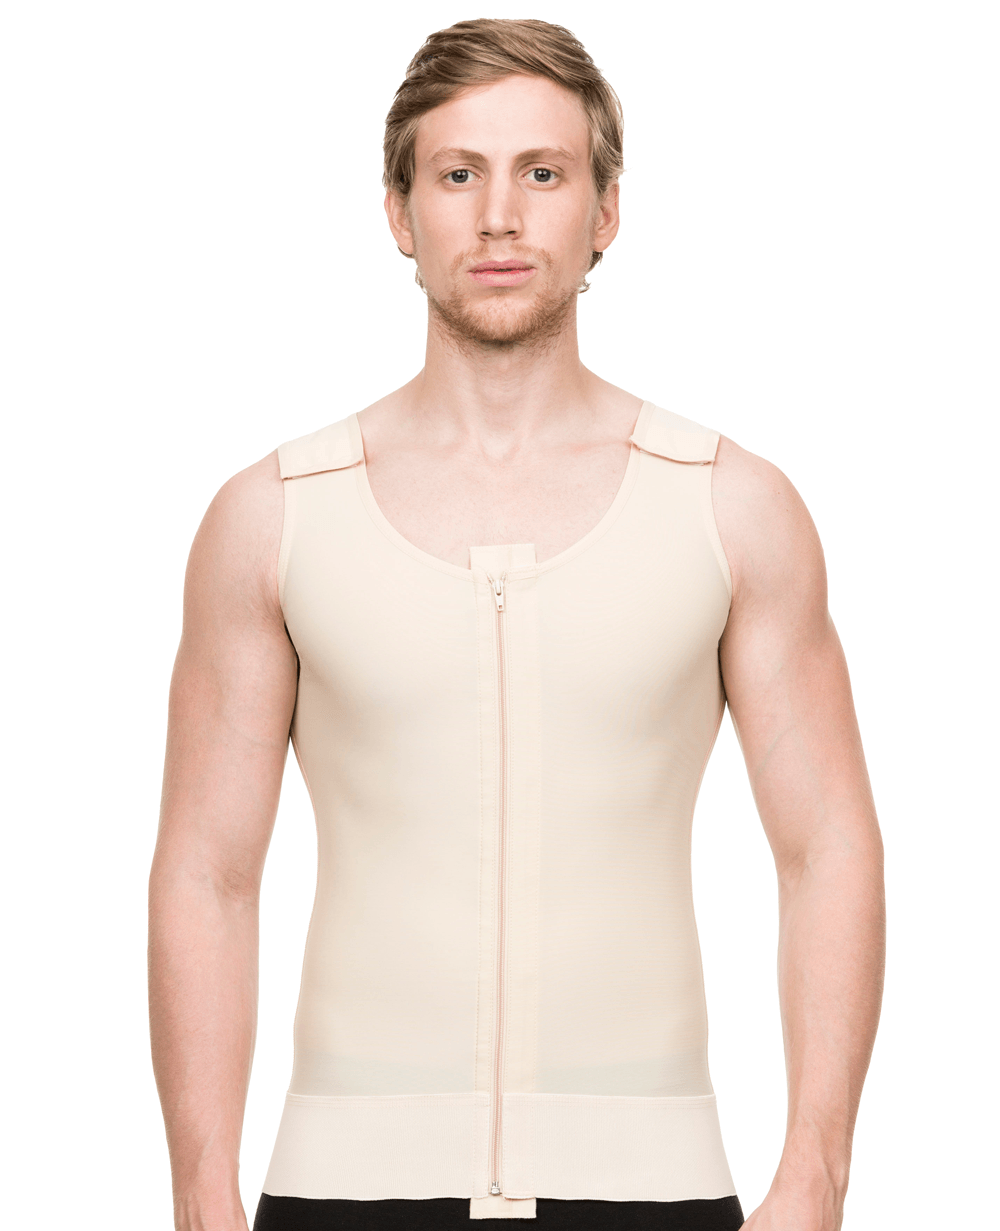 Male Compression Vest with Zipper (MG03)